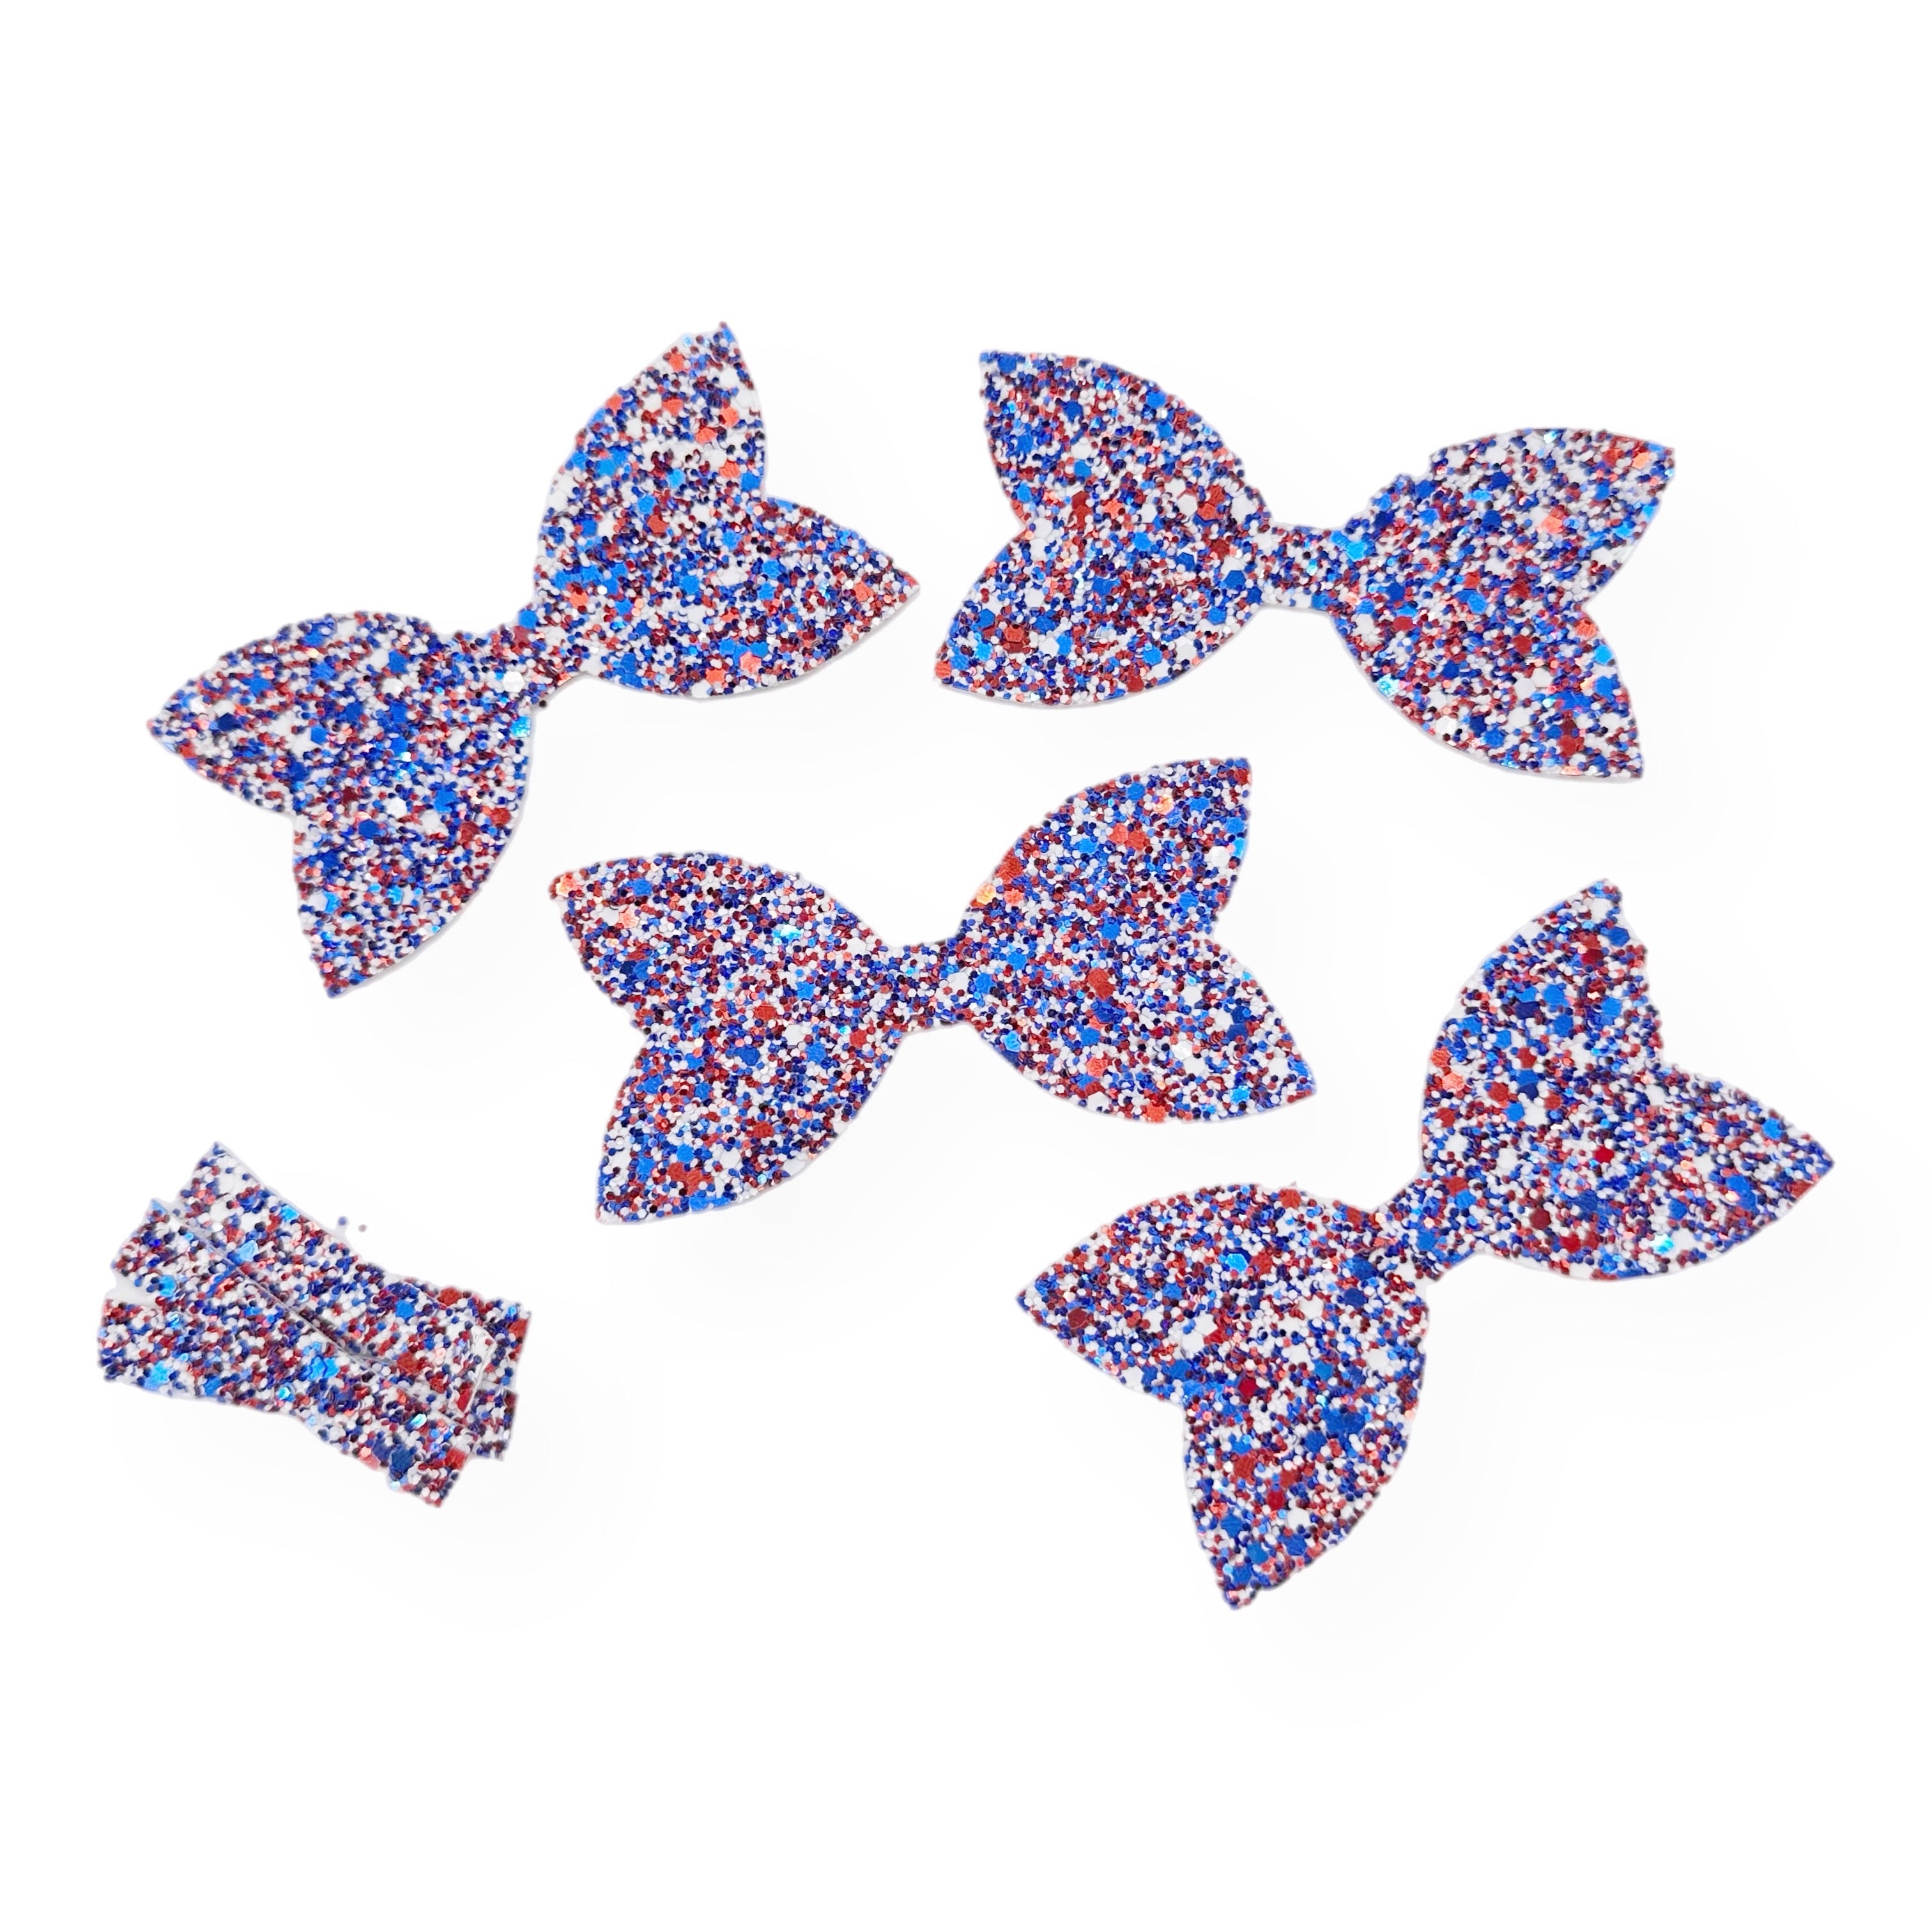 Patriotic Pre Cut Chunky Glitter Bow Tails & Centres 3.5”- 4 Pack